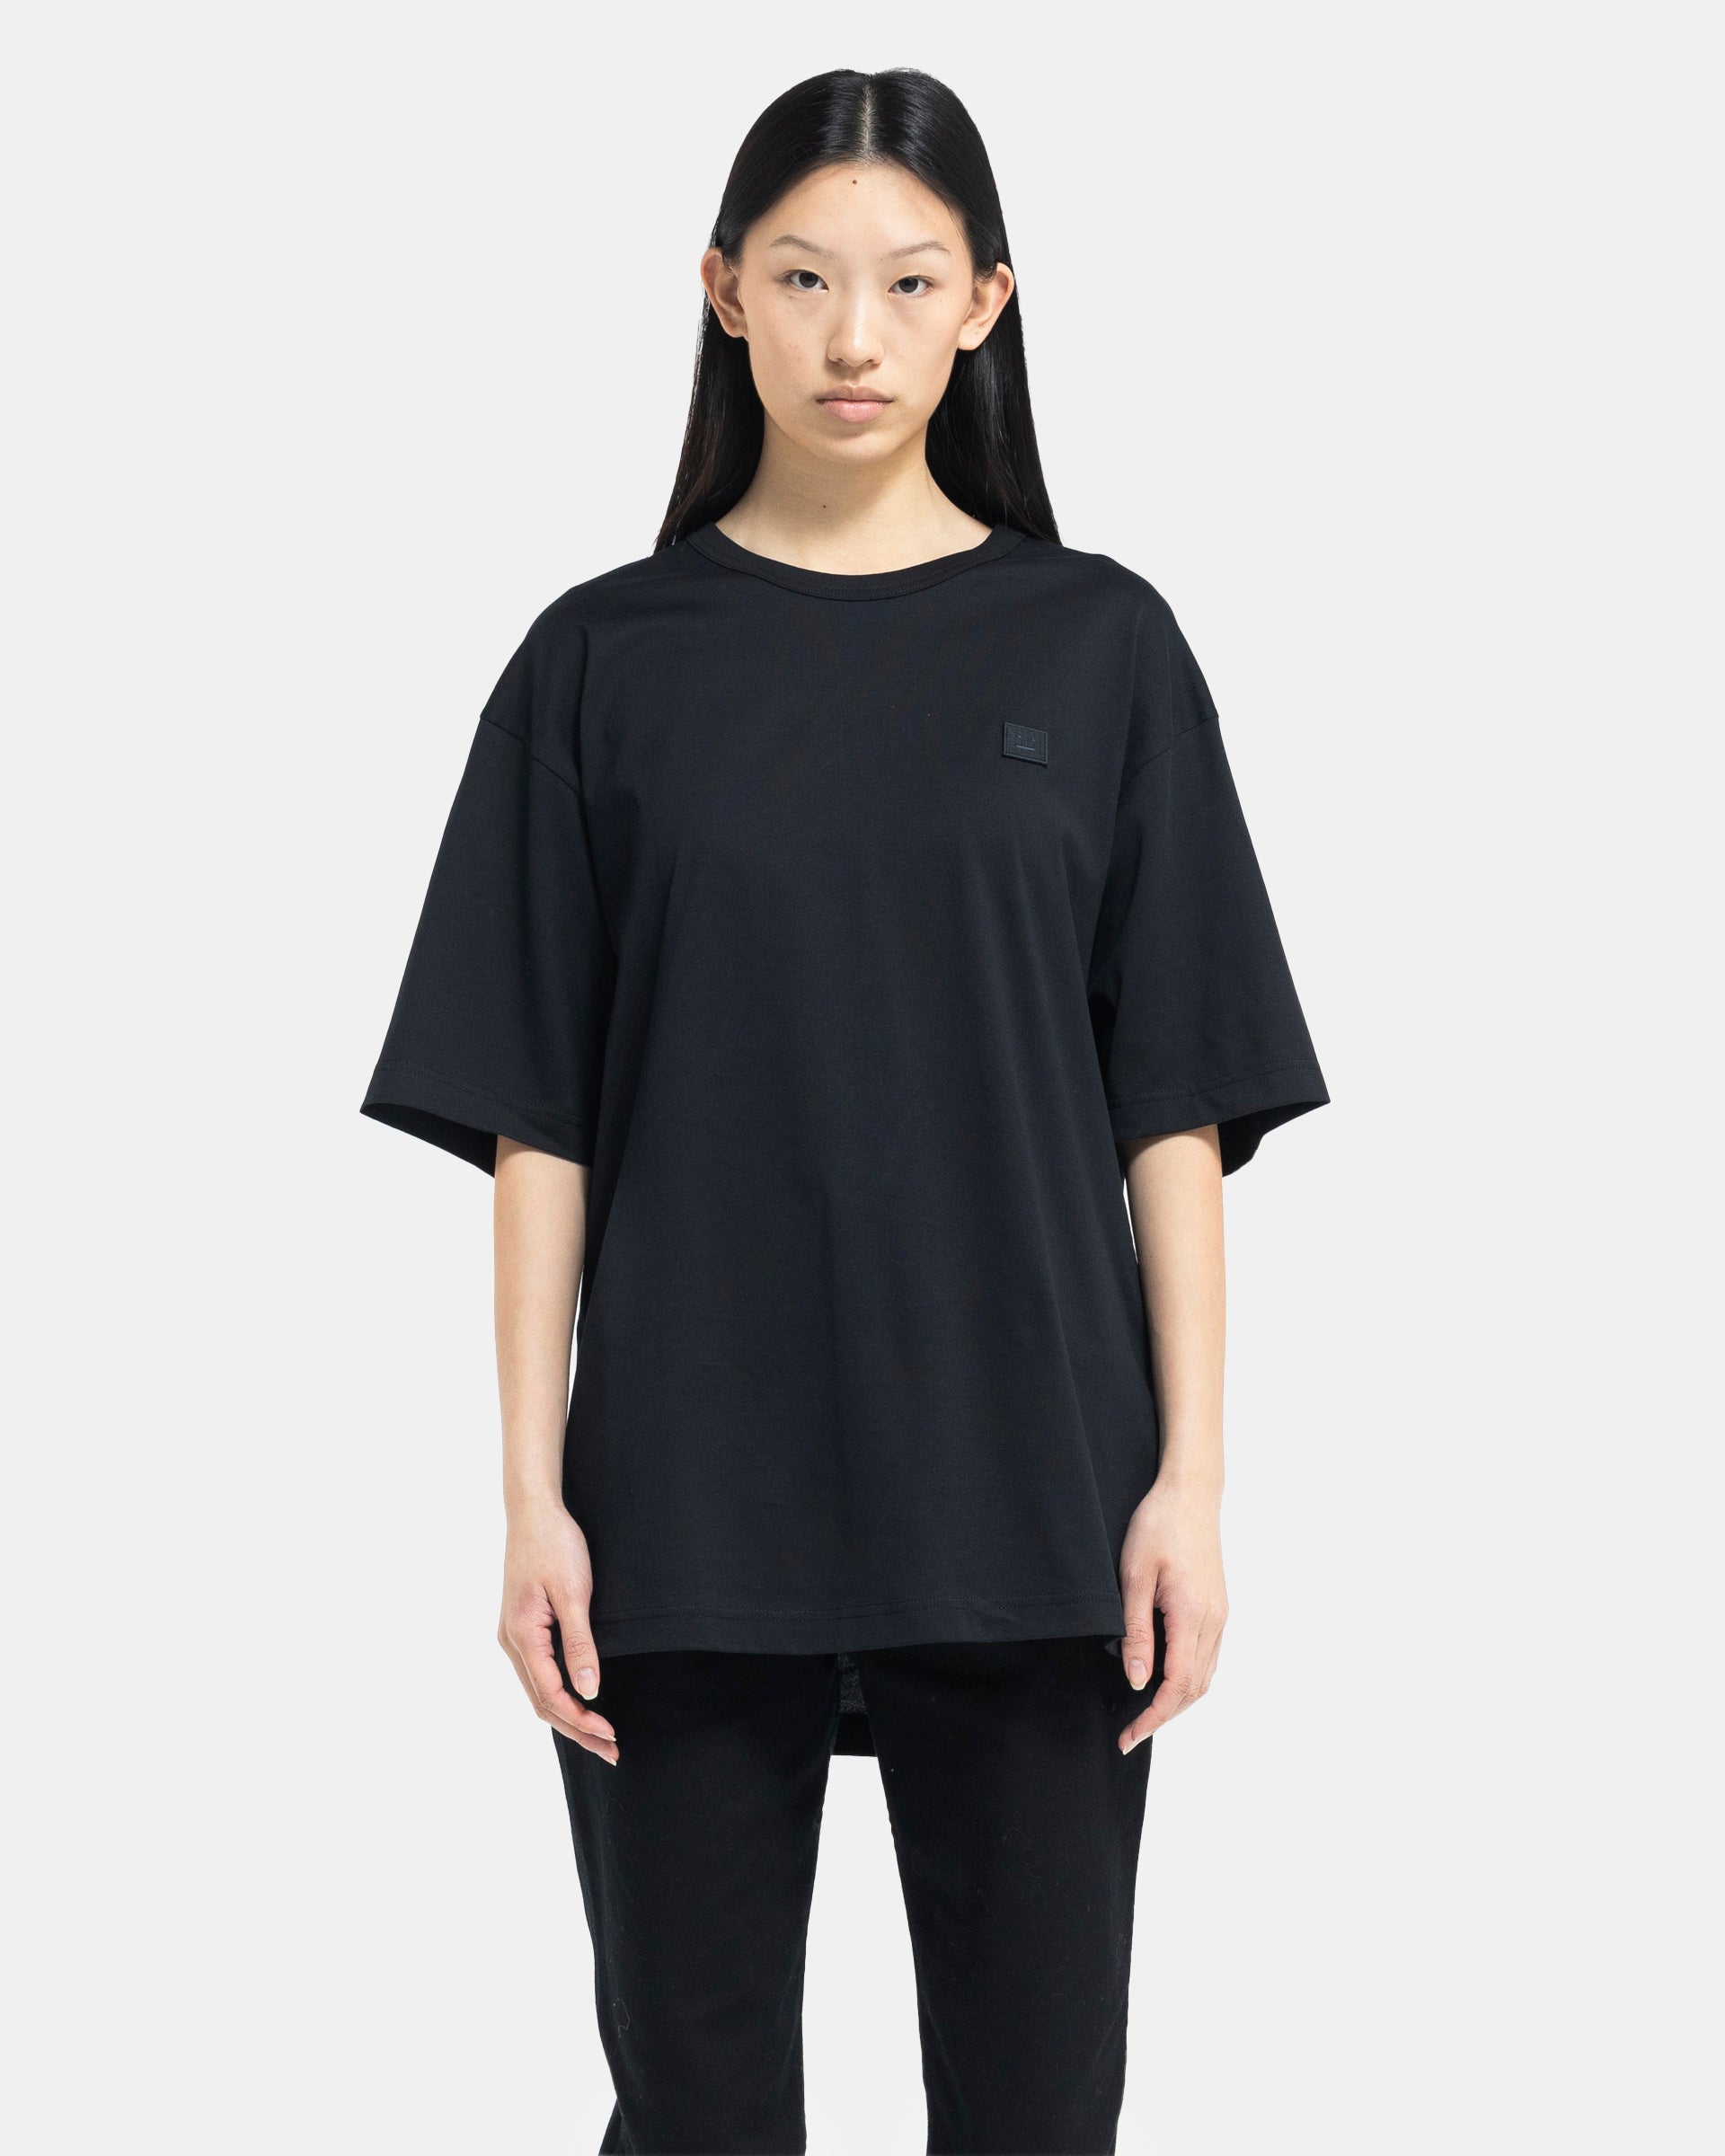 Relaxed Crew Neck T-Shirt in Black